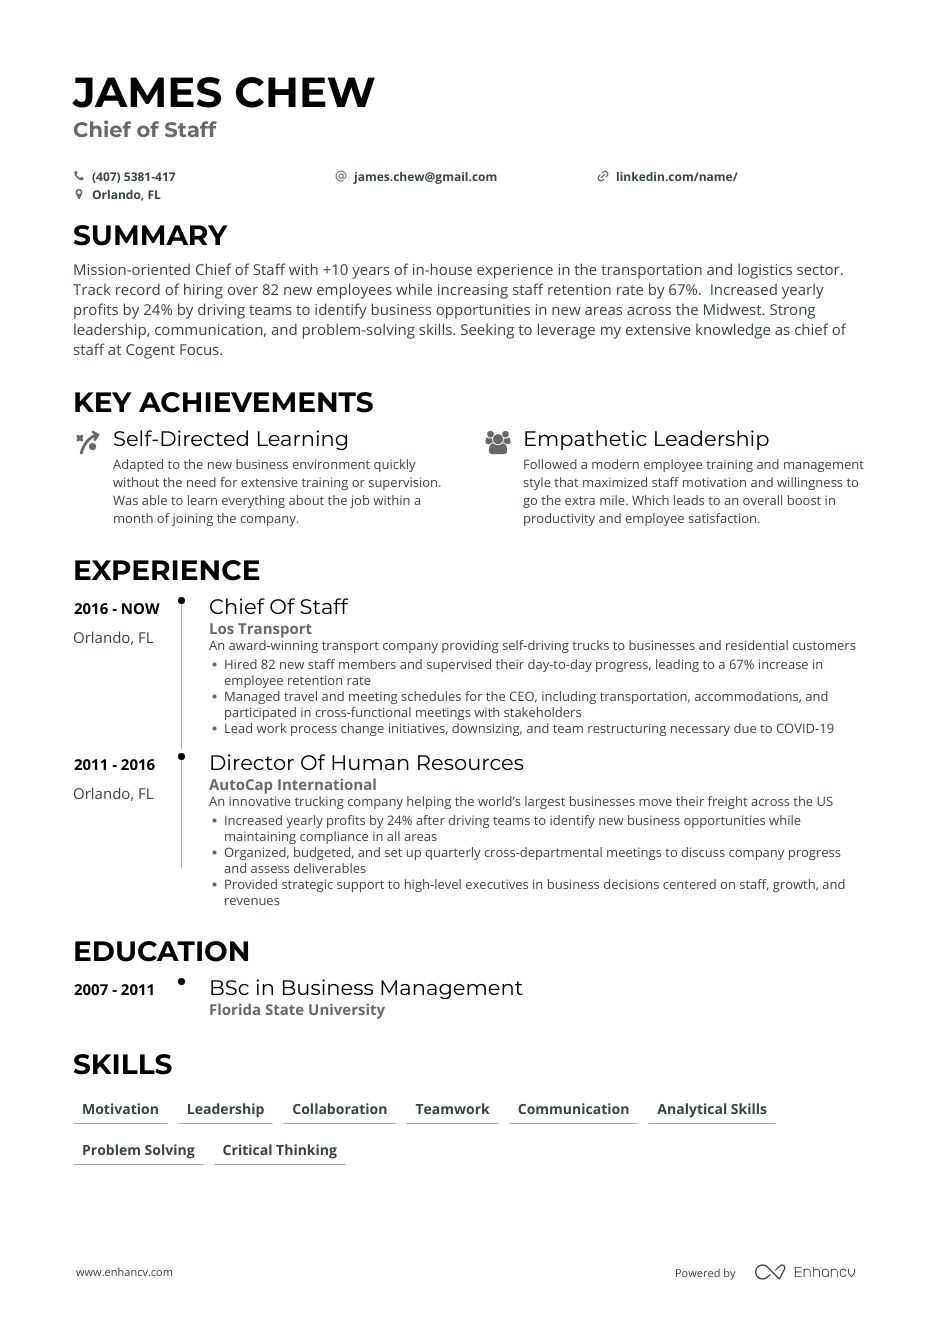 Chief of Staff Resume Examples & Guide for 2021